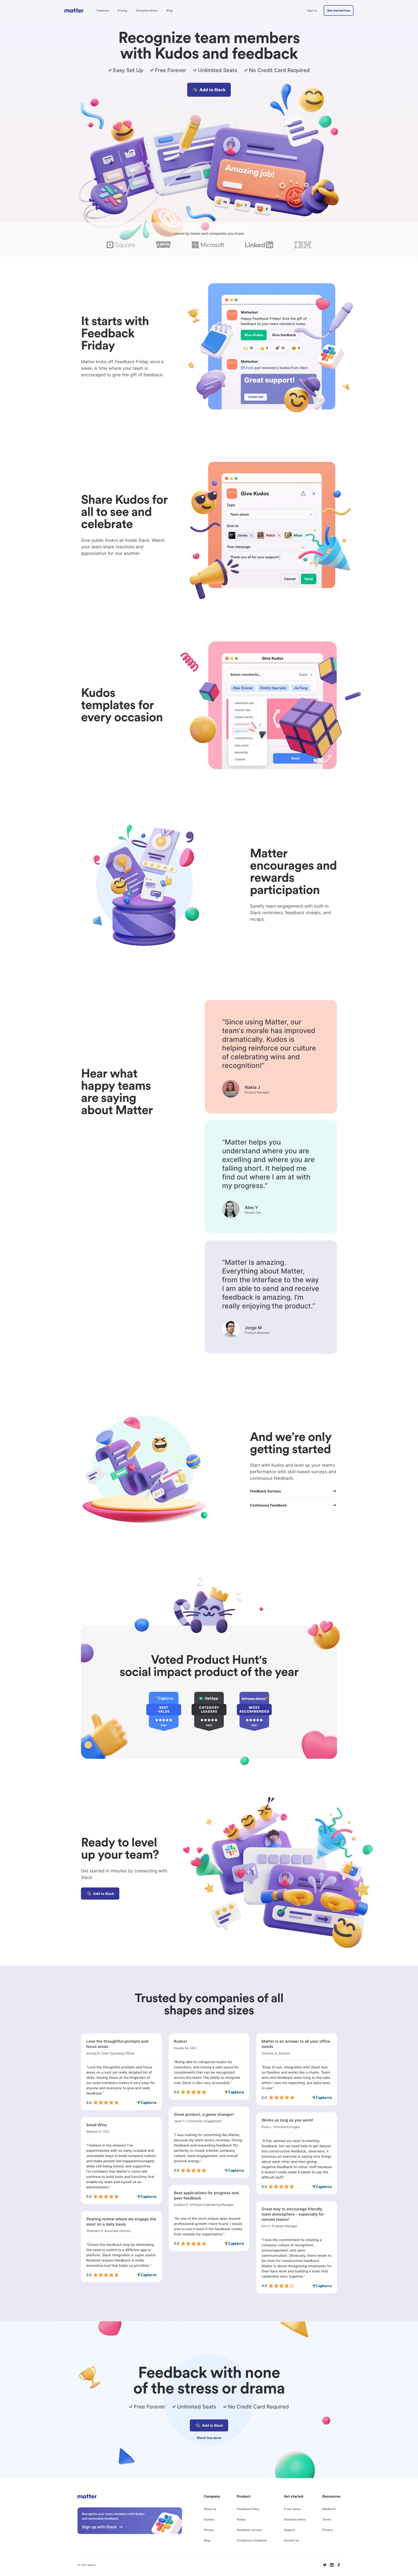 Matter Landing Page Example: Matter is a free Slack app that helps teams recognize each other with Kudos (praise) and grow with constructive feedback.